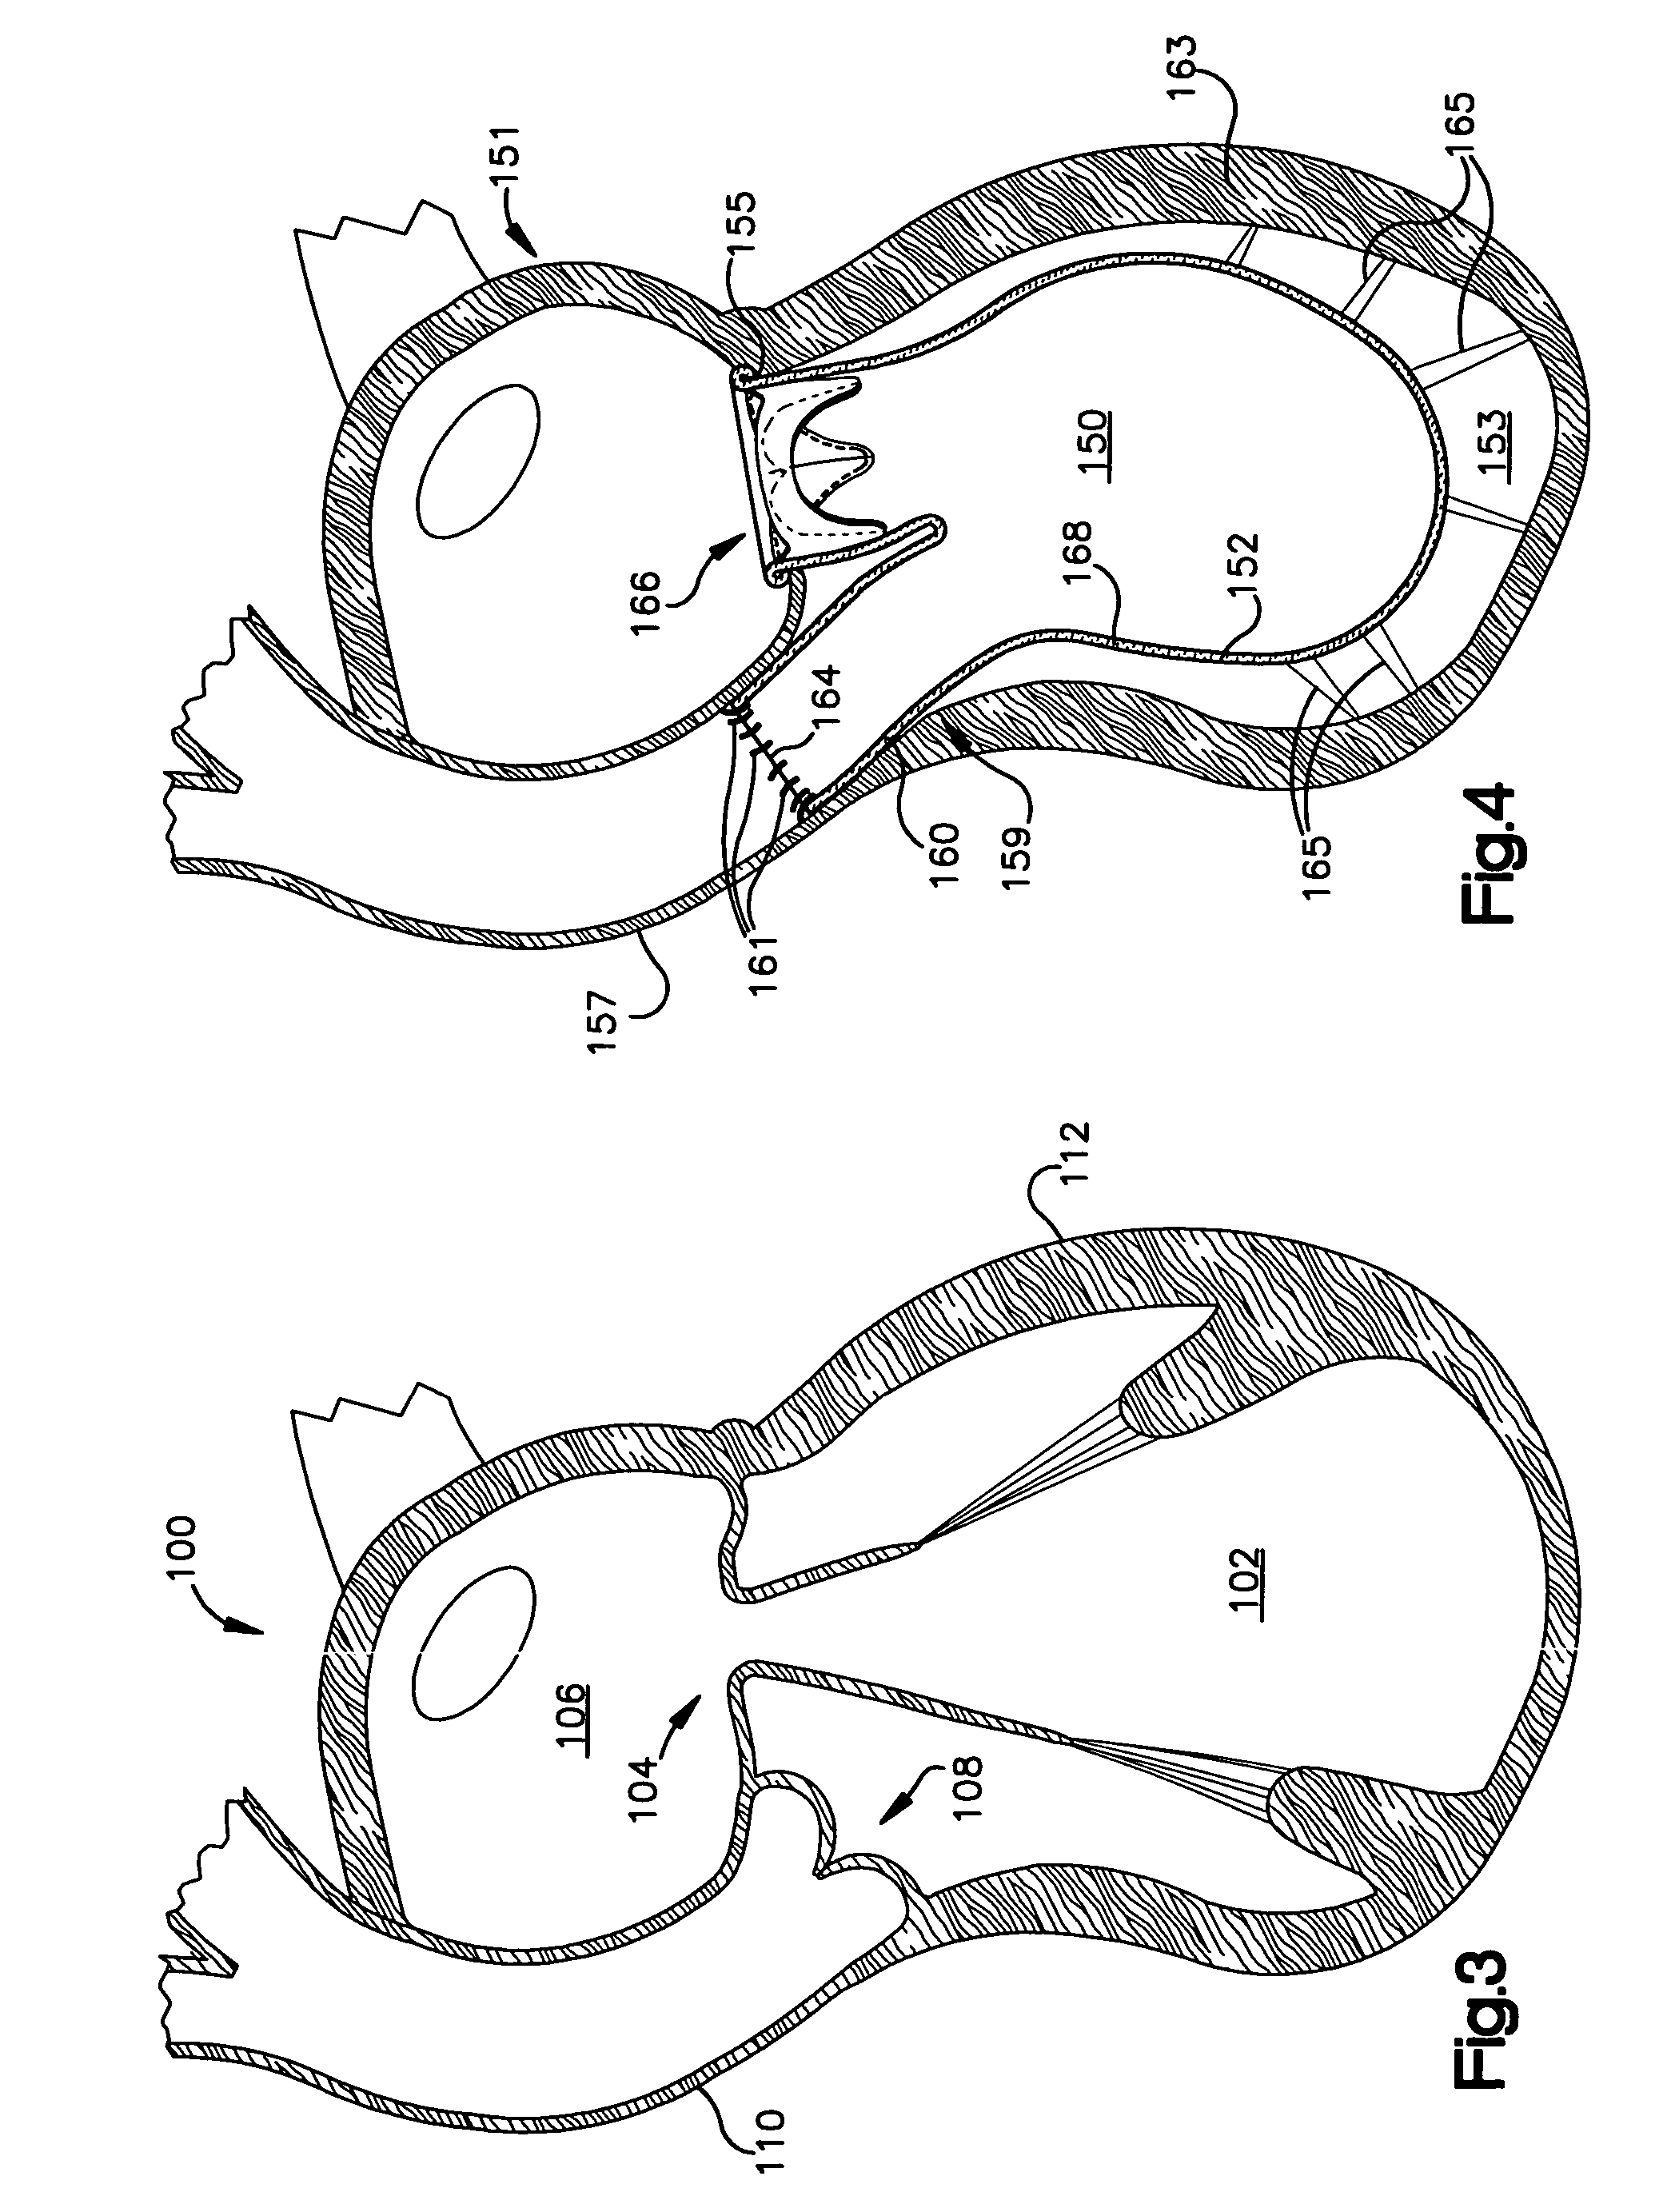 System and method for improving ventricular function